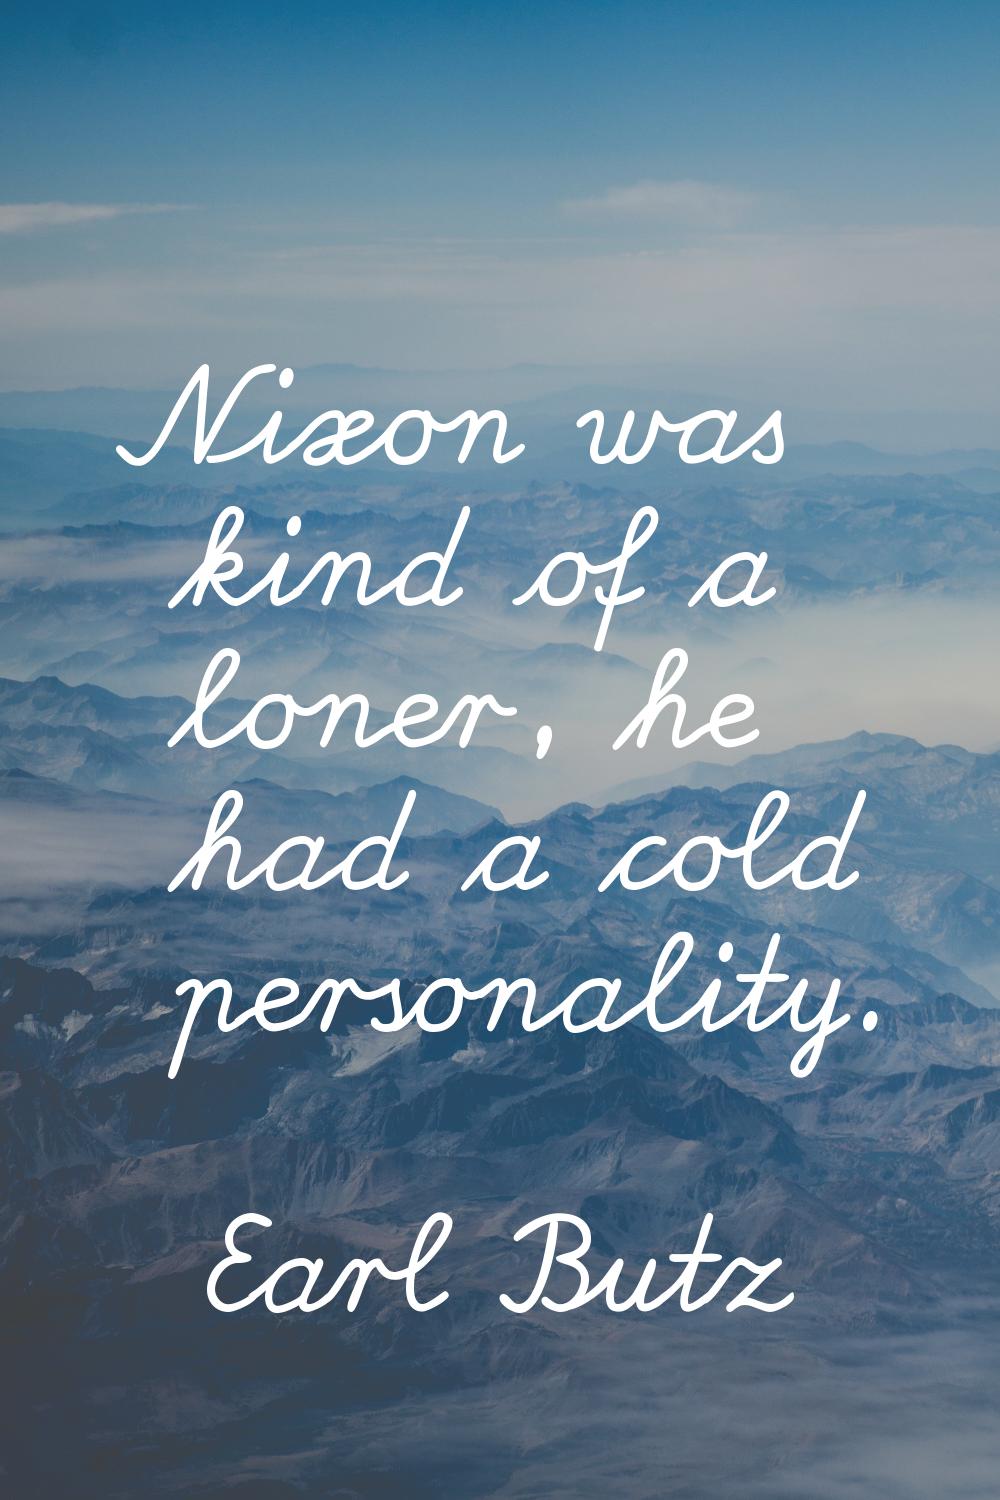 Nixon was kind of a loner, he had a cold personality.